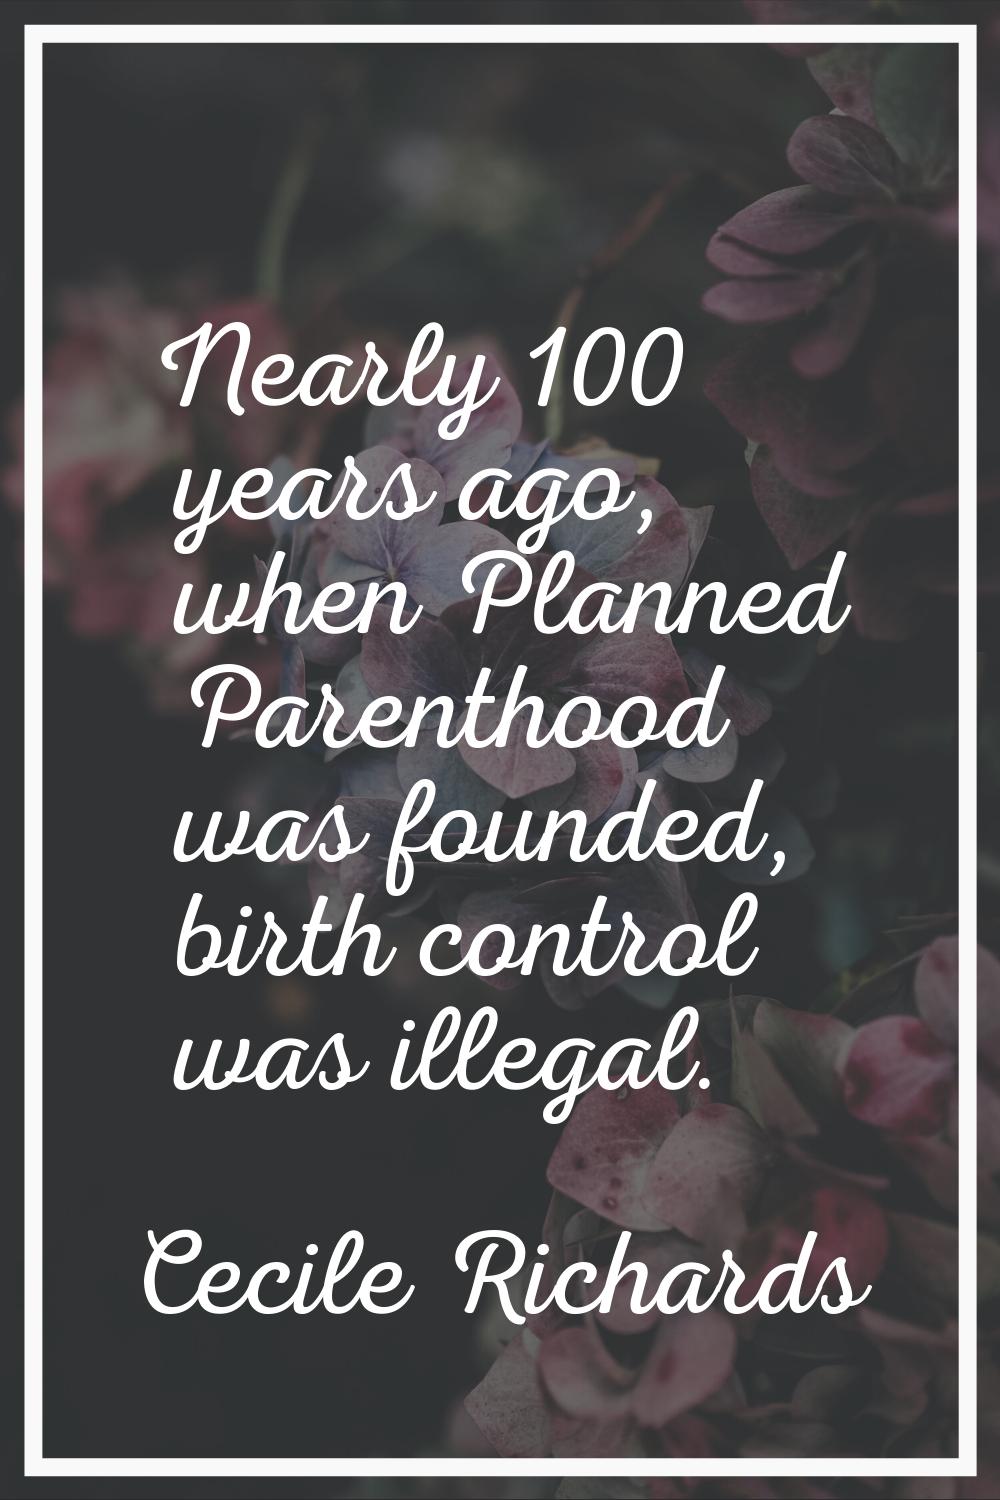 Nearly 100 years ago, when Planned Parenthood was founded, birth control was illegal.